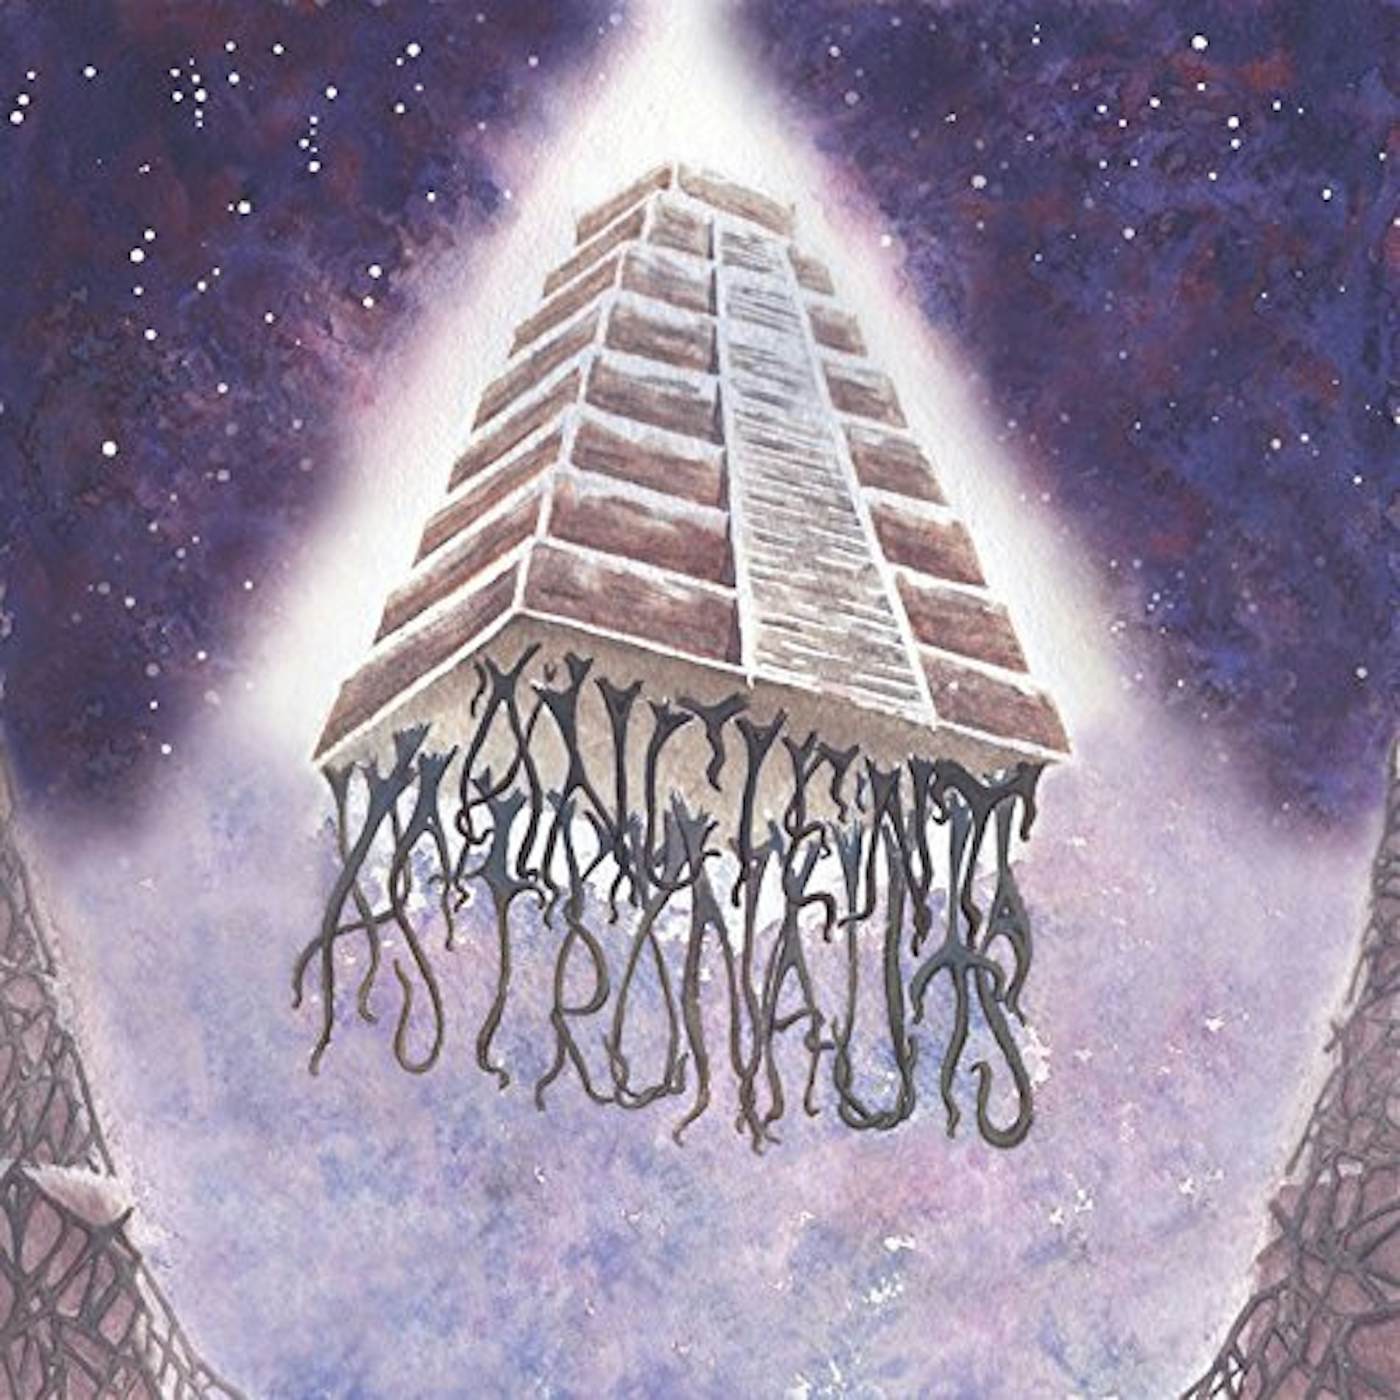 Holy Mountain ANCIENT ASTRONAUTS CD